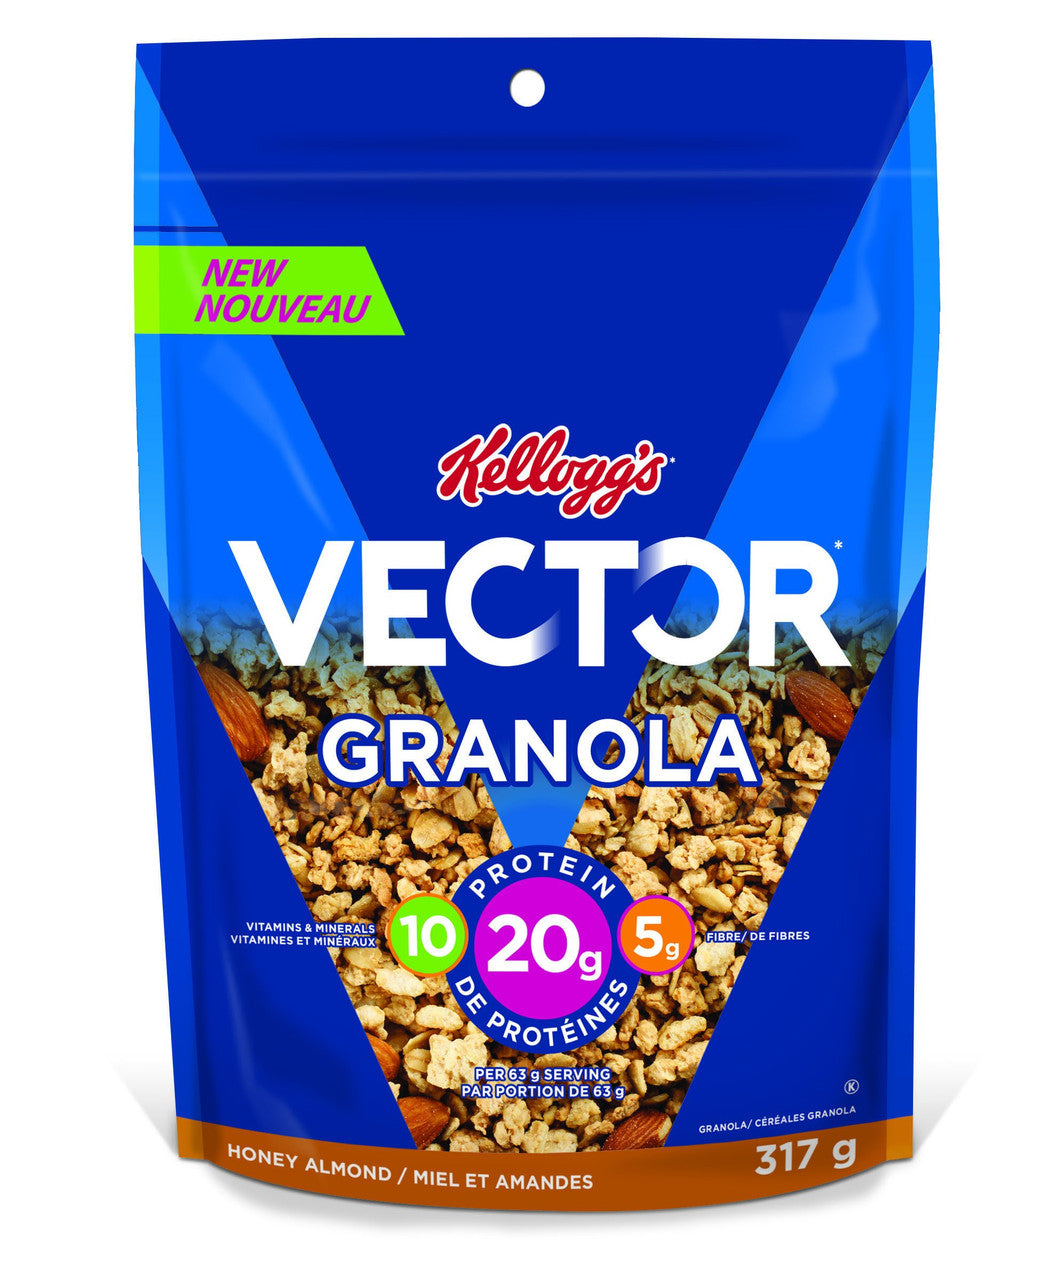 Kellogg's Vector Granola Honey Almond, 317g/11oz, Cereal, (Imported from Canada)